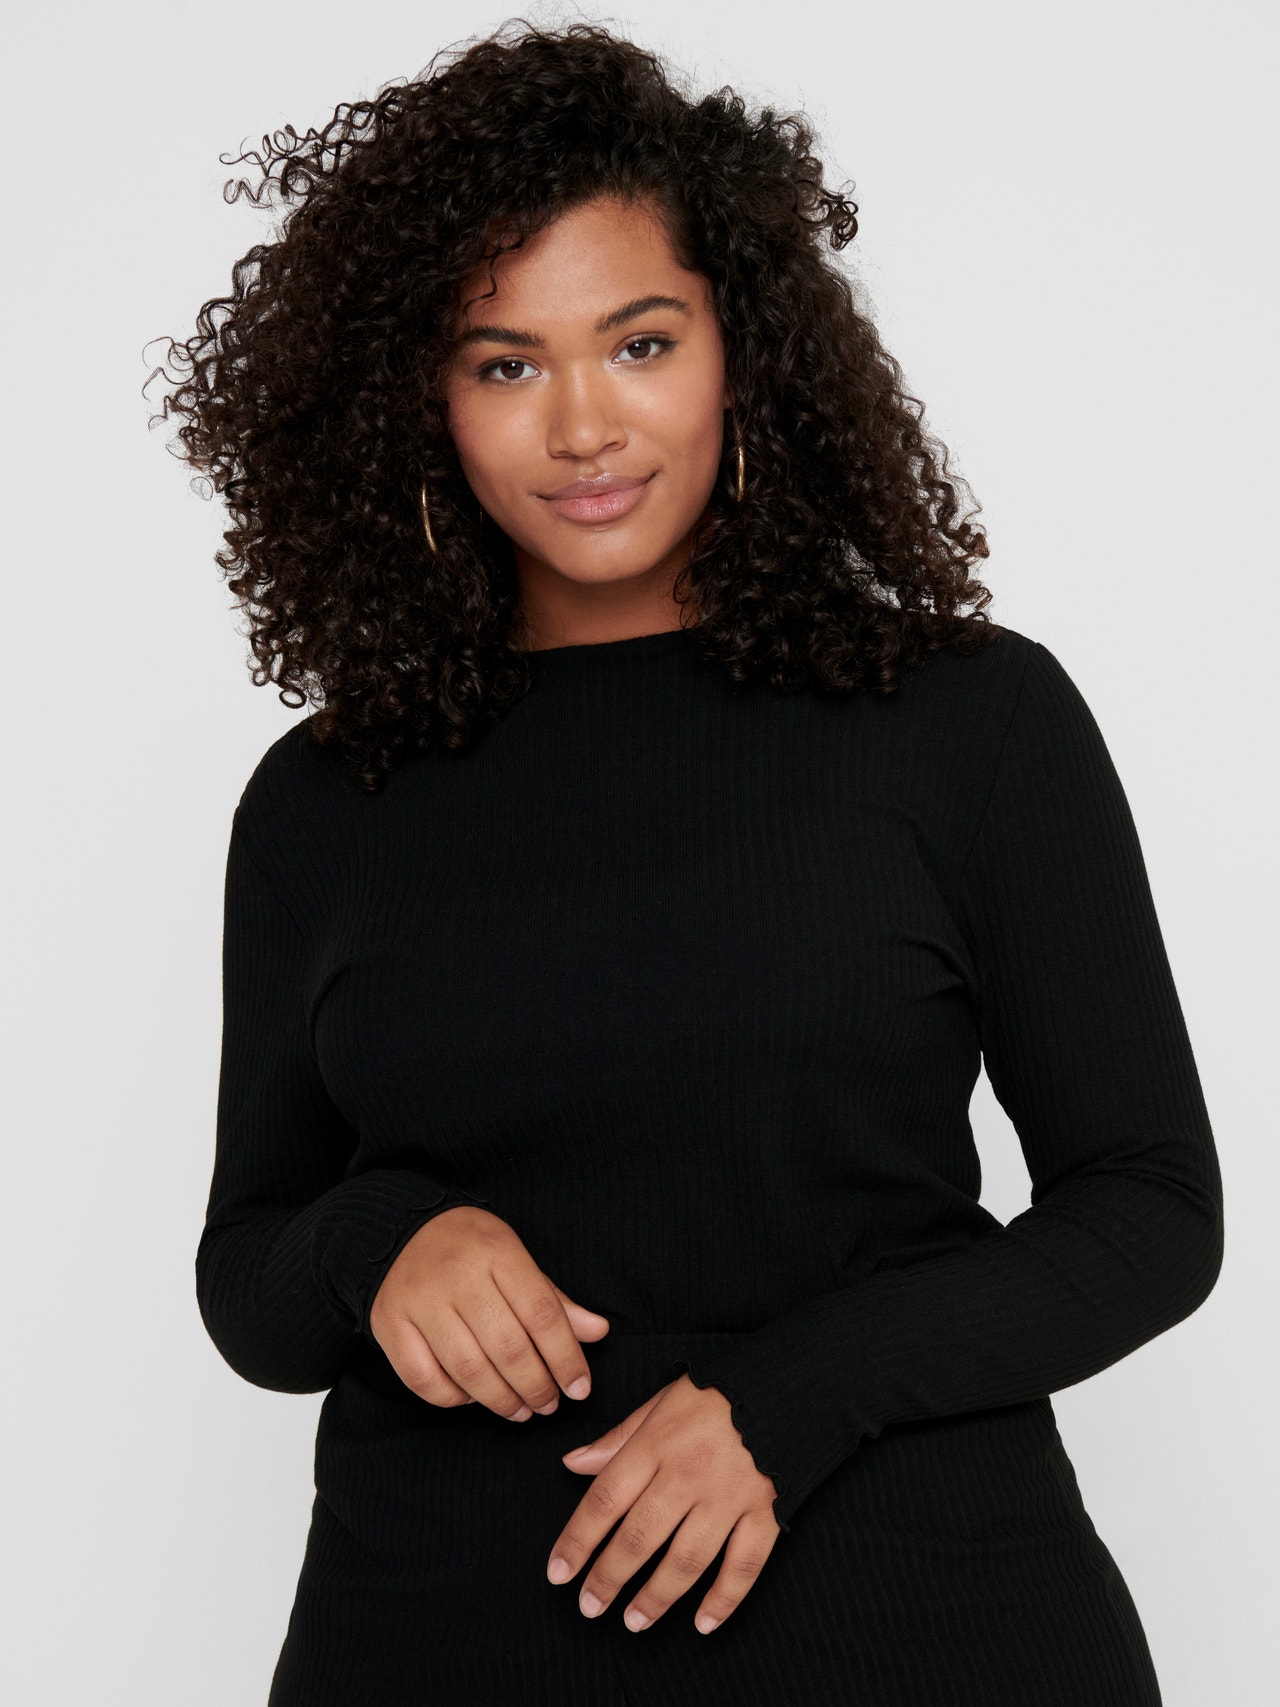 ONLY Stretch Fit High neck Top -Black - 15211495